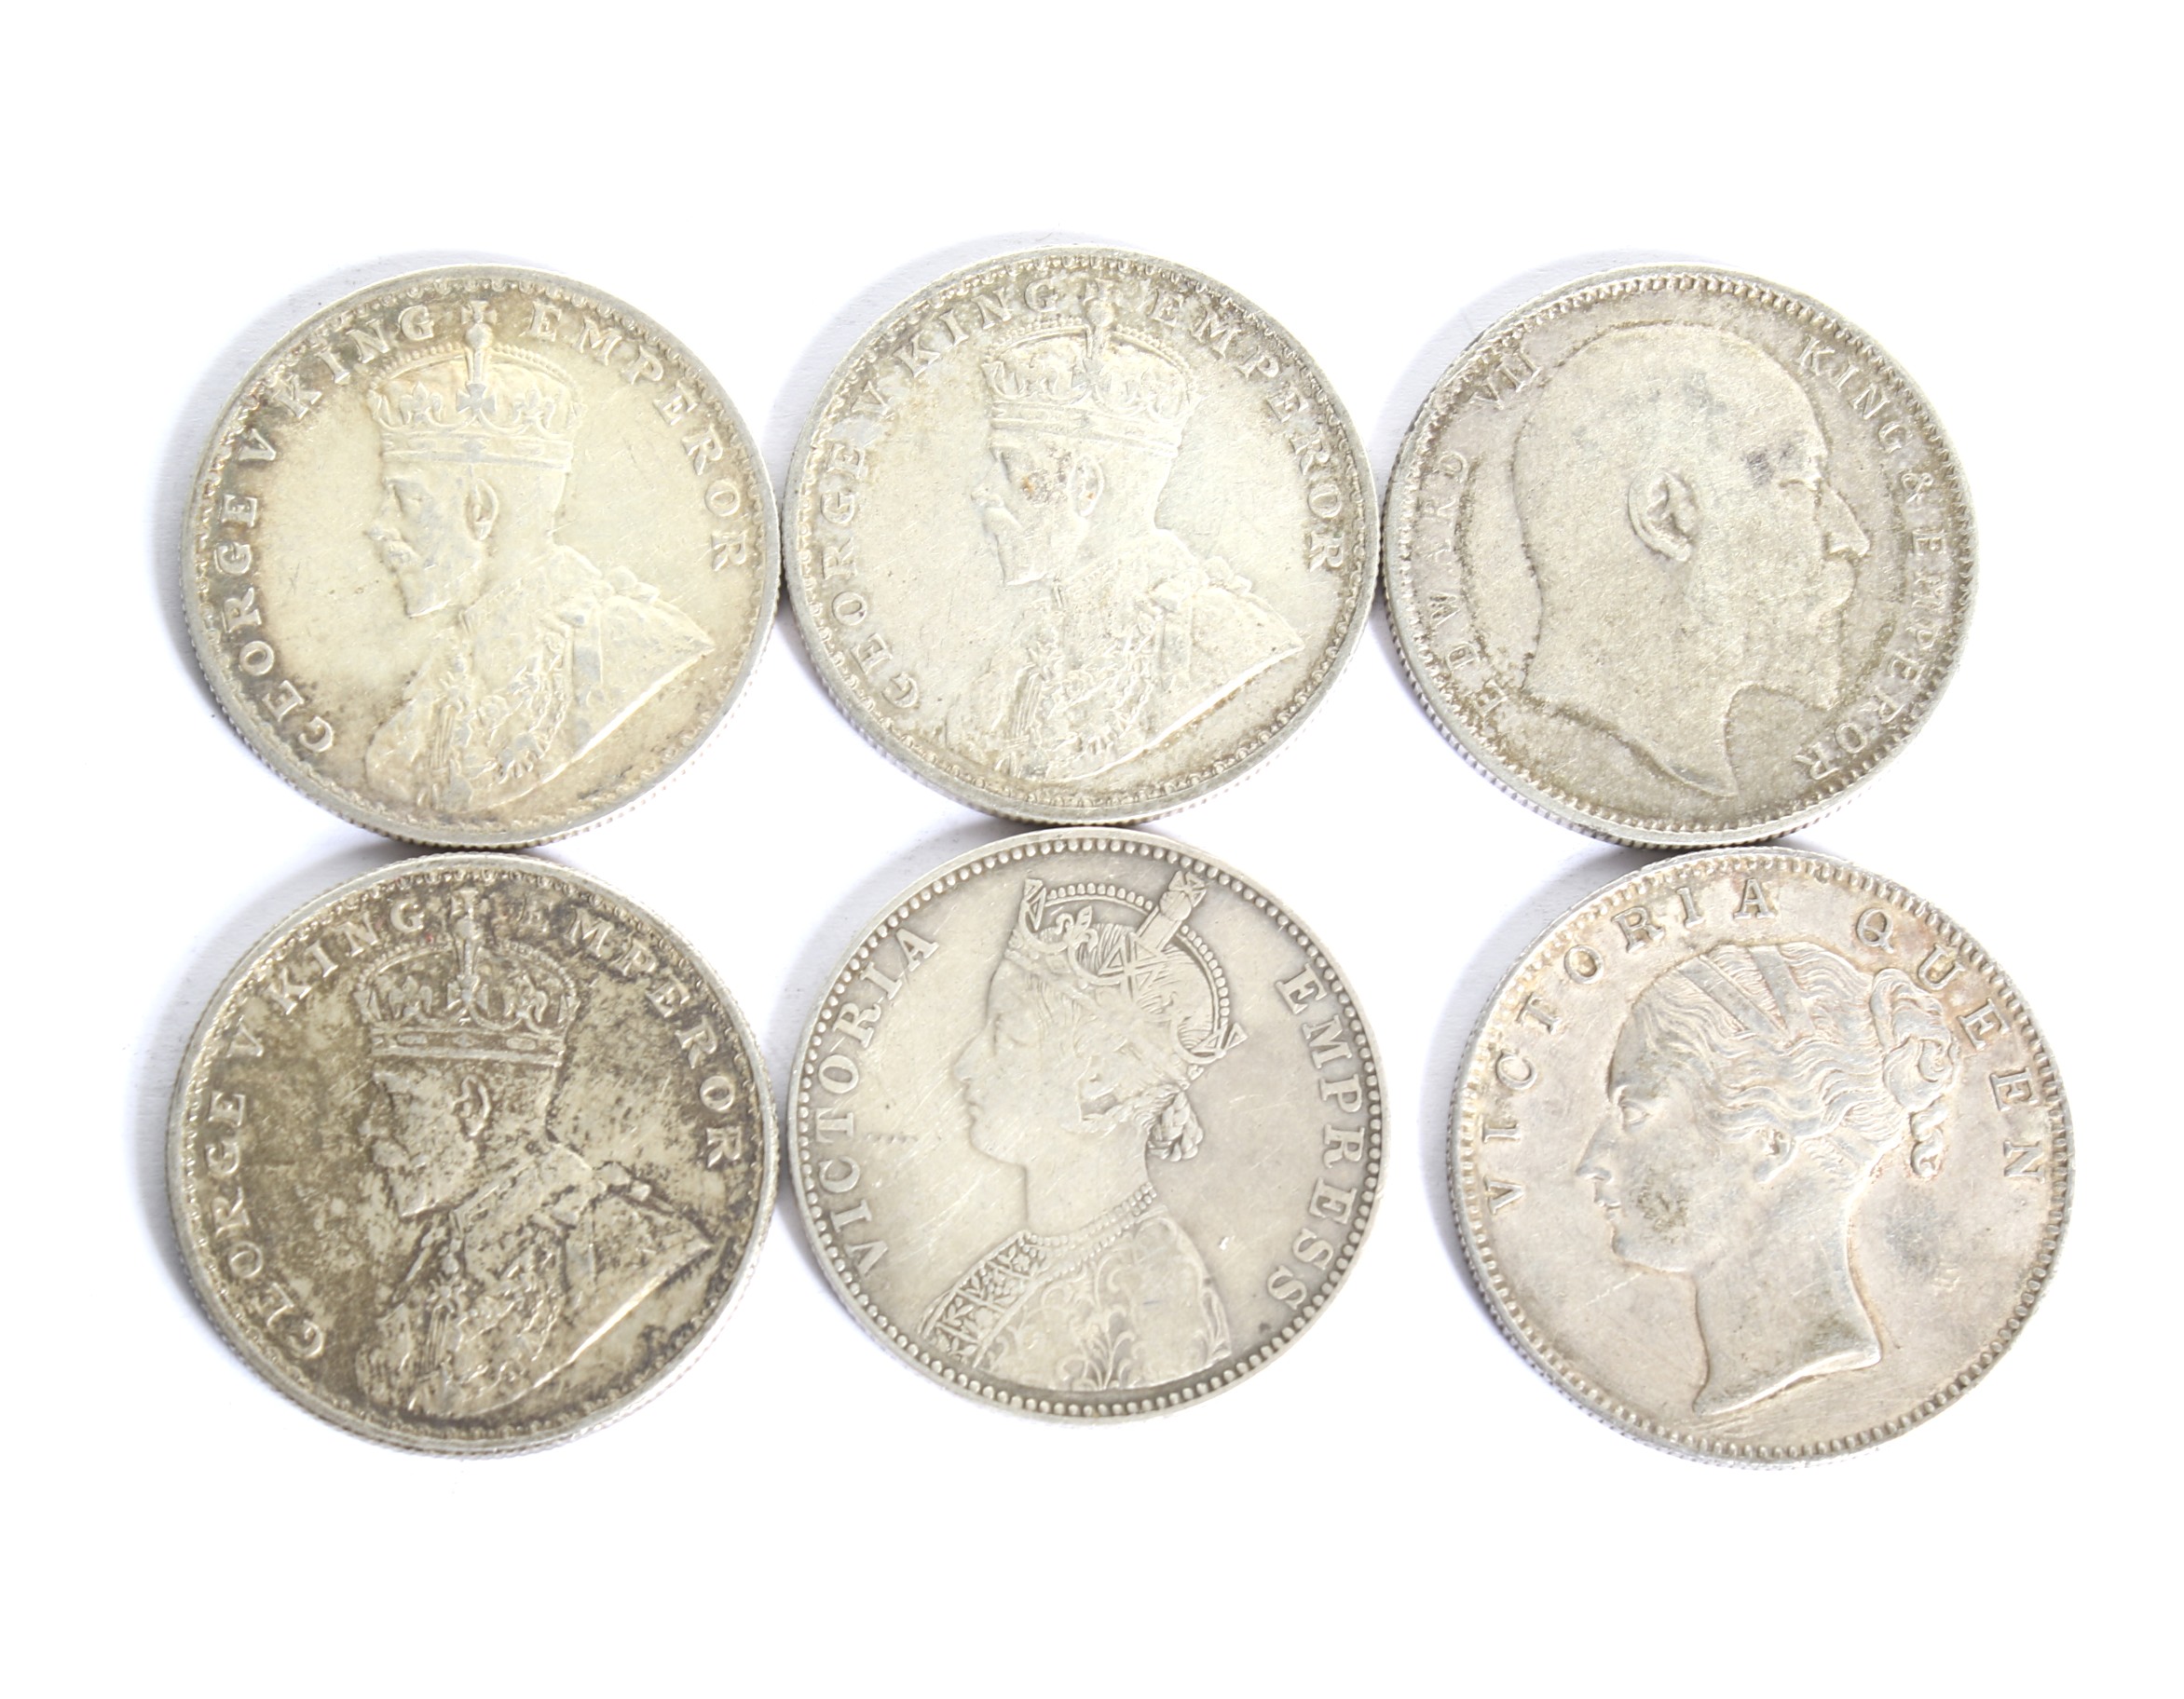 A group of six Indian Rupees coins. Dated 1840; 1907; 1917; 1918; 1919 and Bikanir Victoria Rupee.